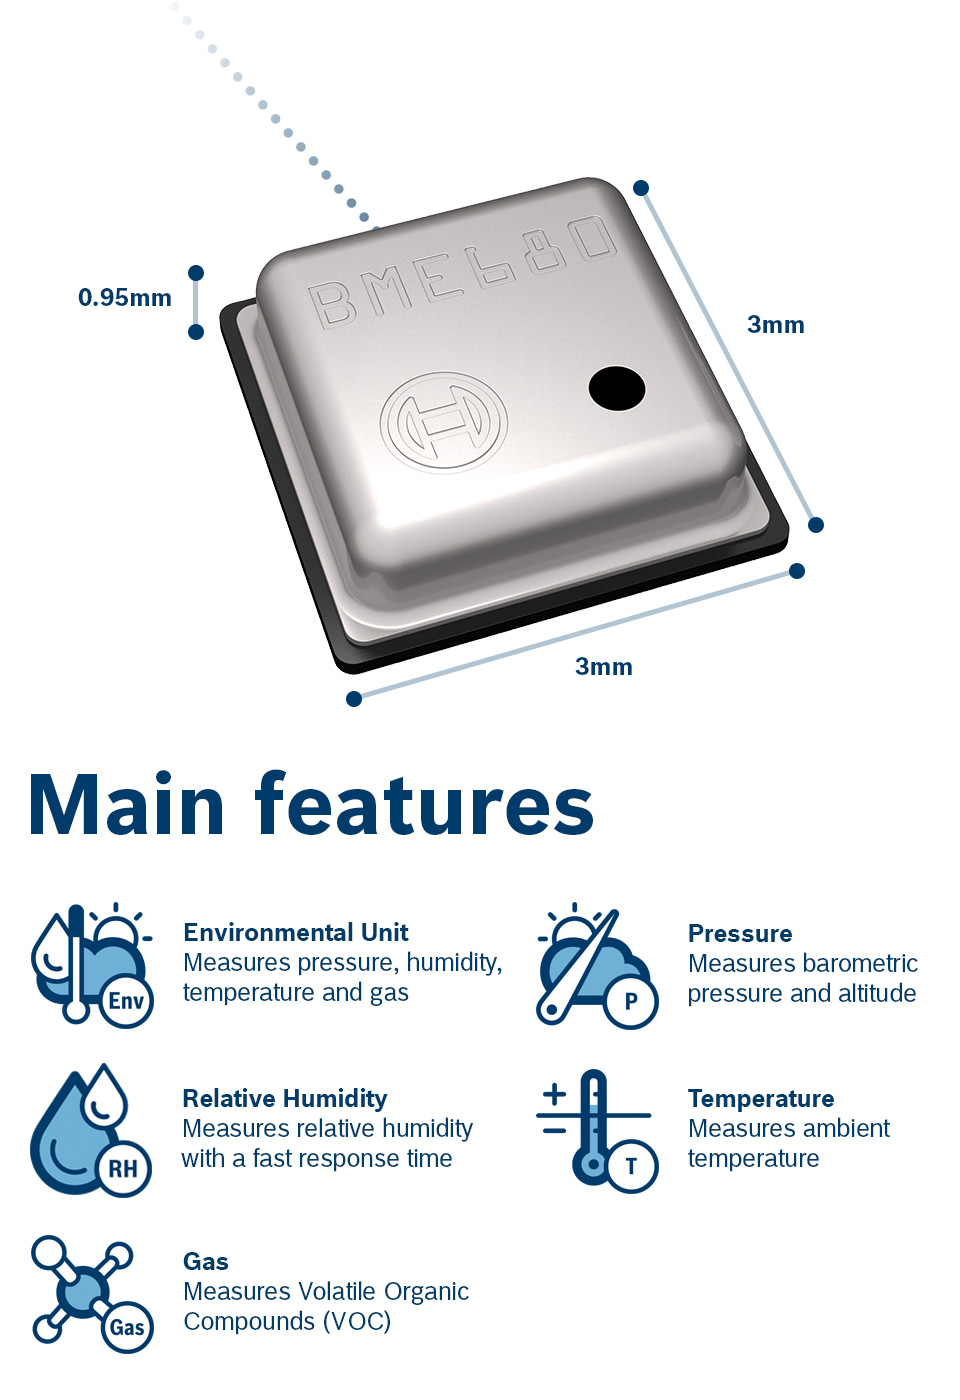 BME680 measures pressure, humidity, temperature and indoor air quality